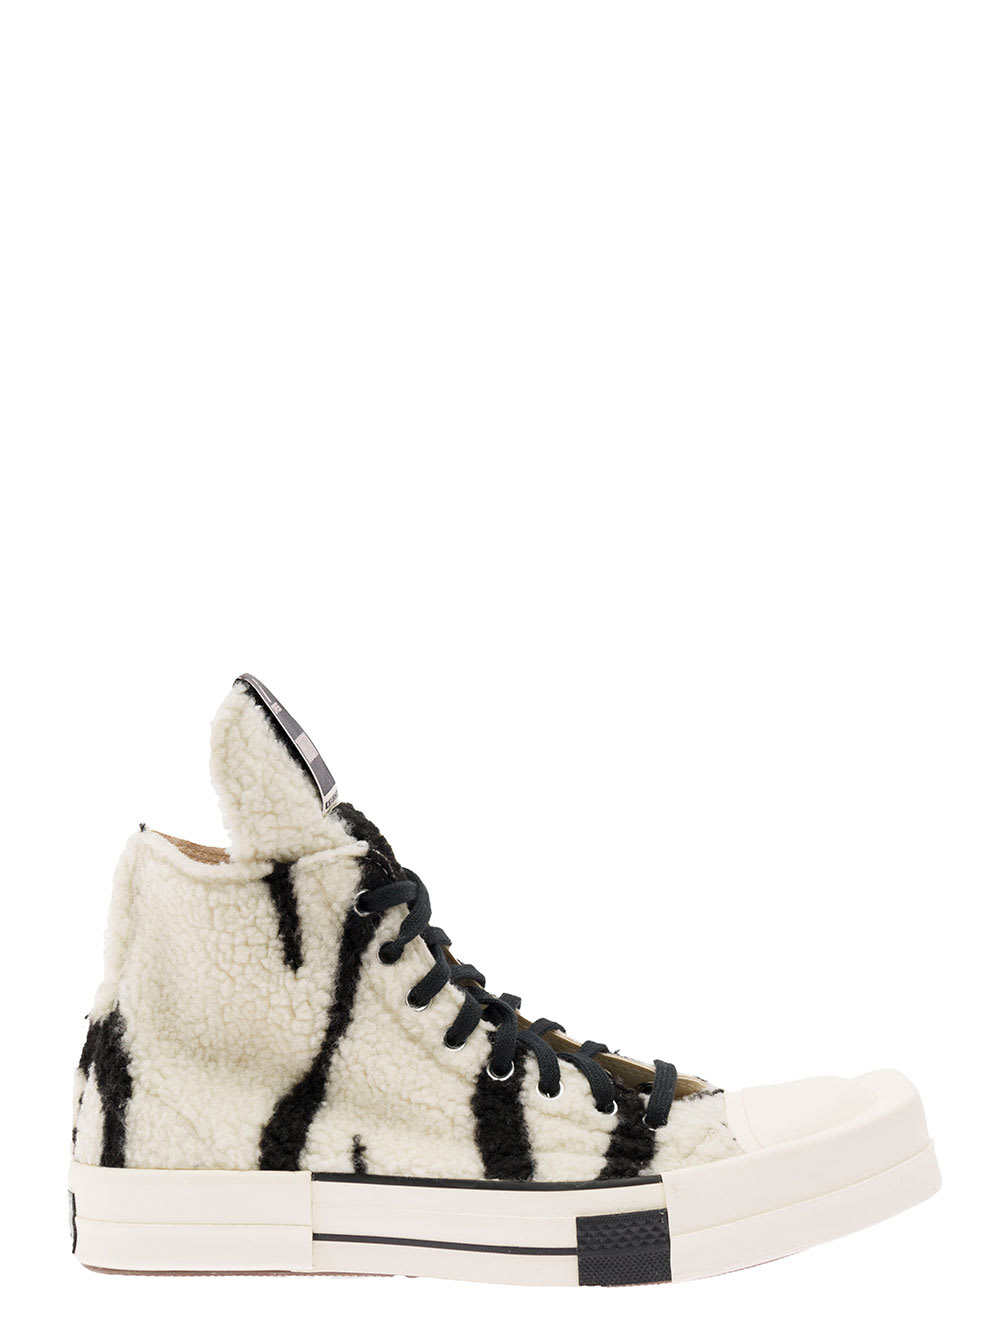 DRKSHDW BLACK AND WHITE SHEARLING SNEAKERS IN COTTON MAN